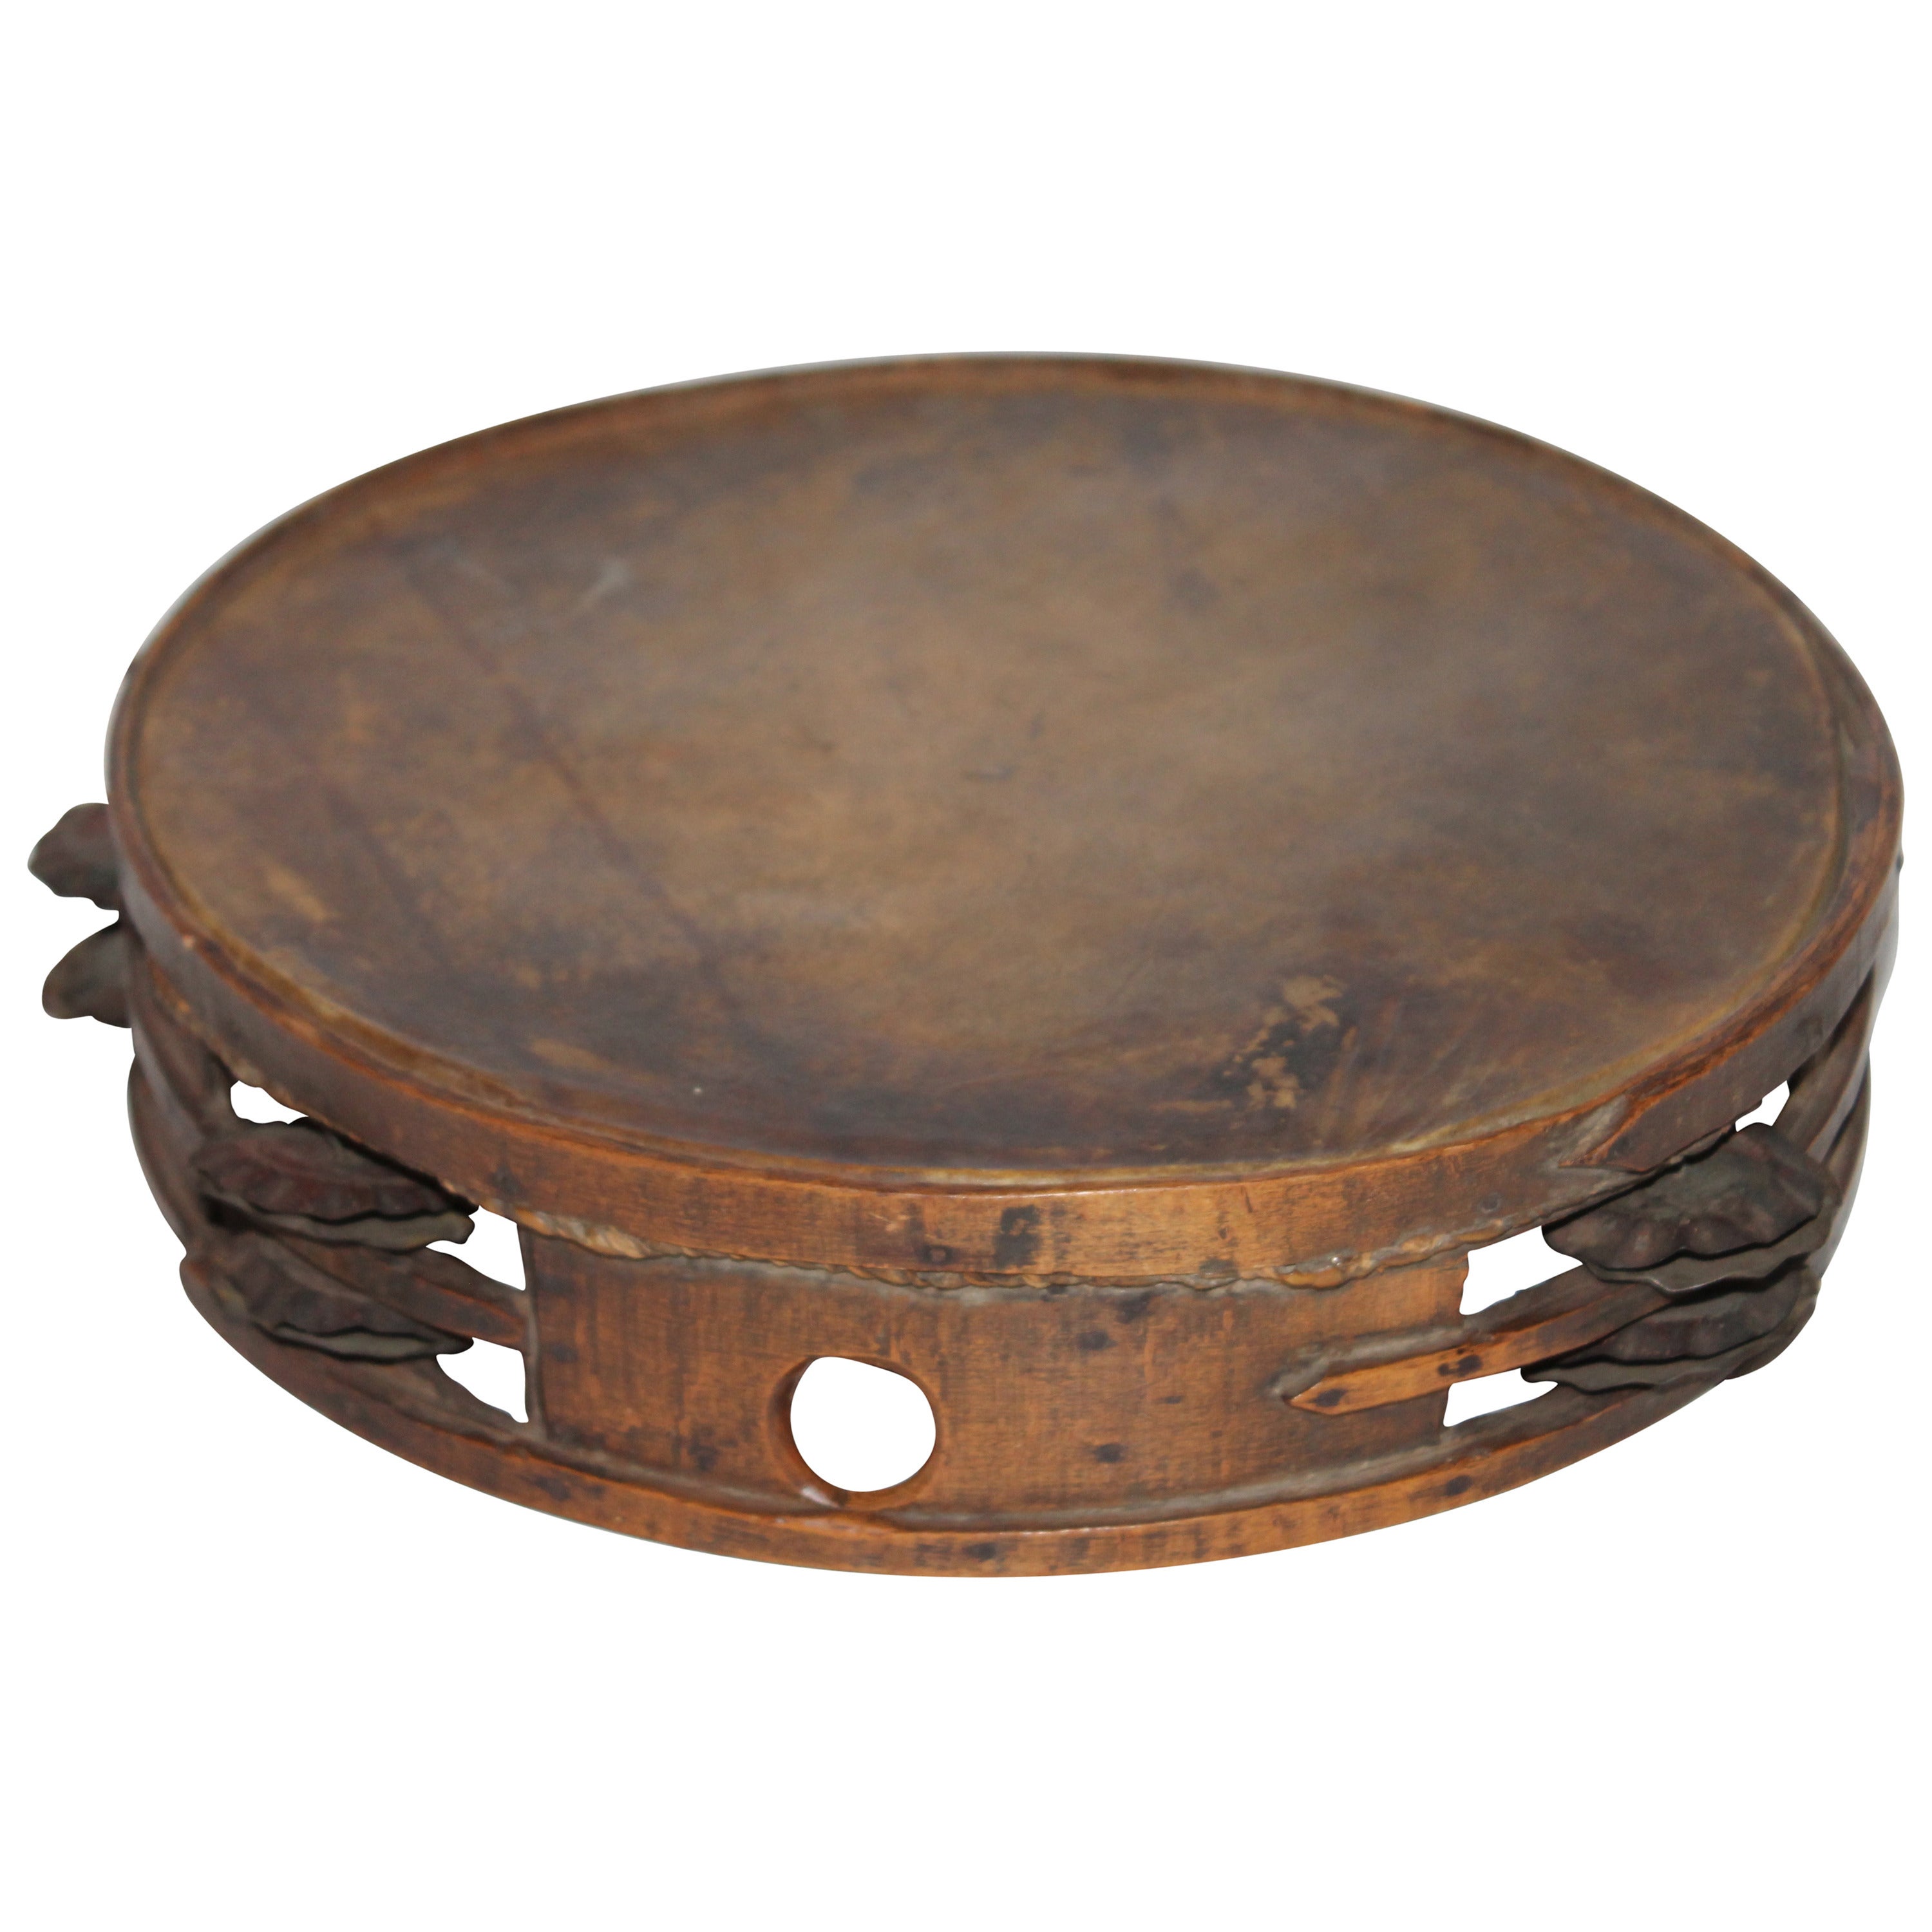 Early 19th Century  American Tambourine from New England